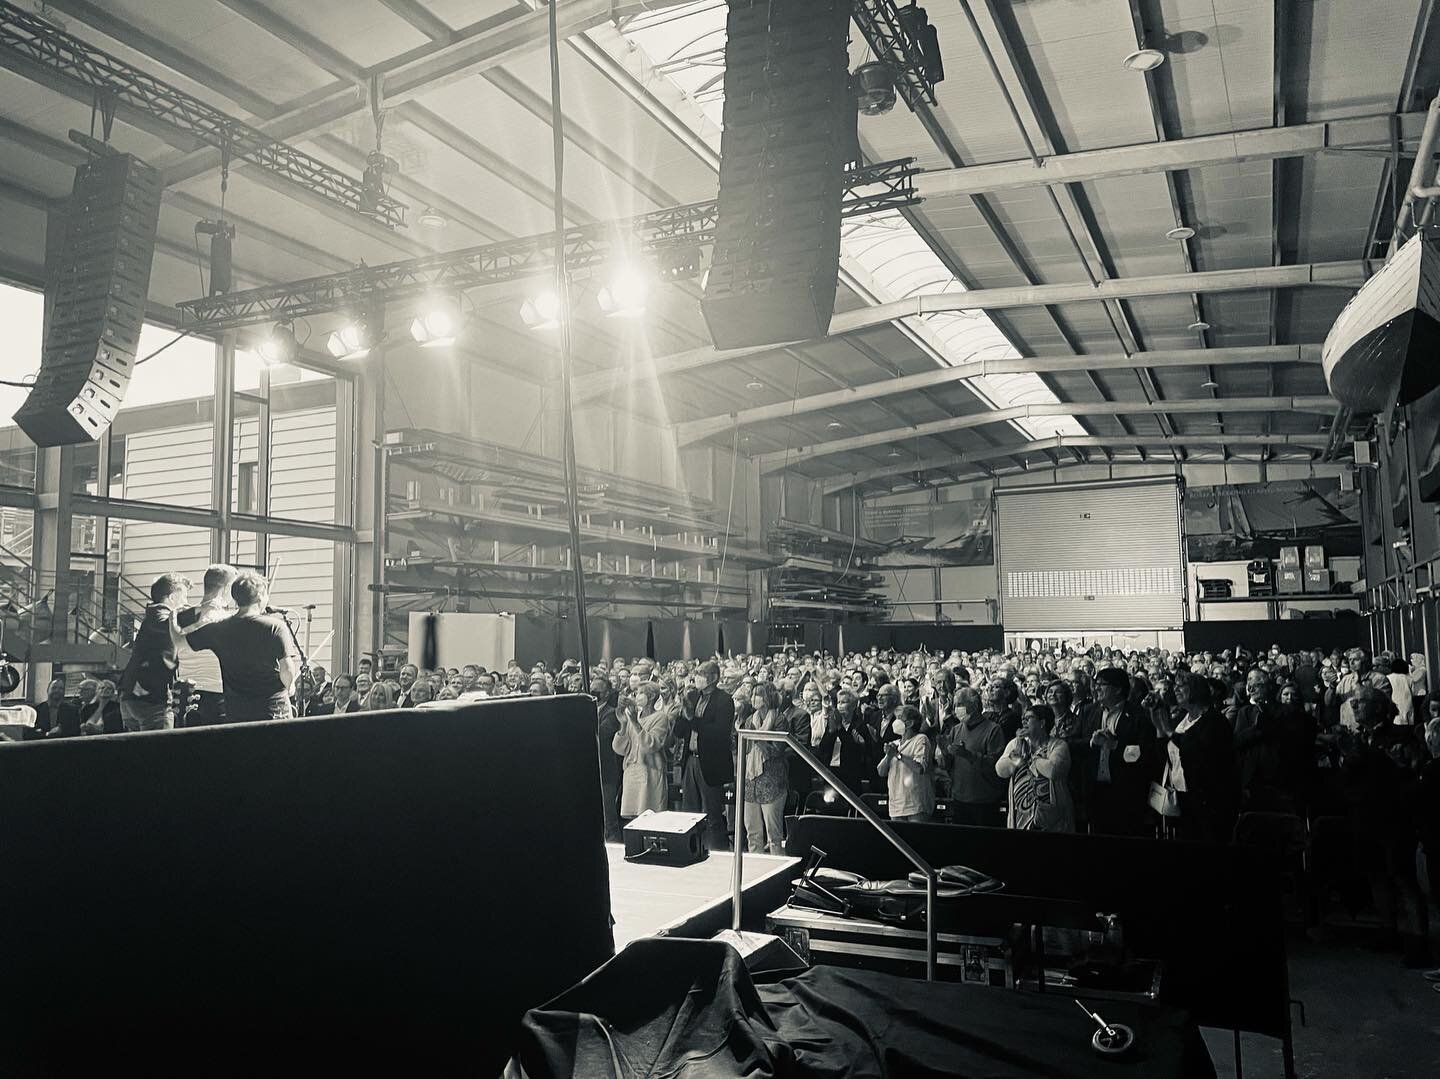 Schleswig-Holstein Musik Festival 2022 Germany

Welcomed us back this summer and we are so grateful. The audience, staff, production, organization was outstanding! SHMF presented us in a boathouse, tomato farm, and a barn.. why not ?! It was joyous i